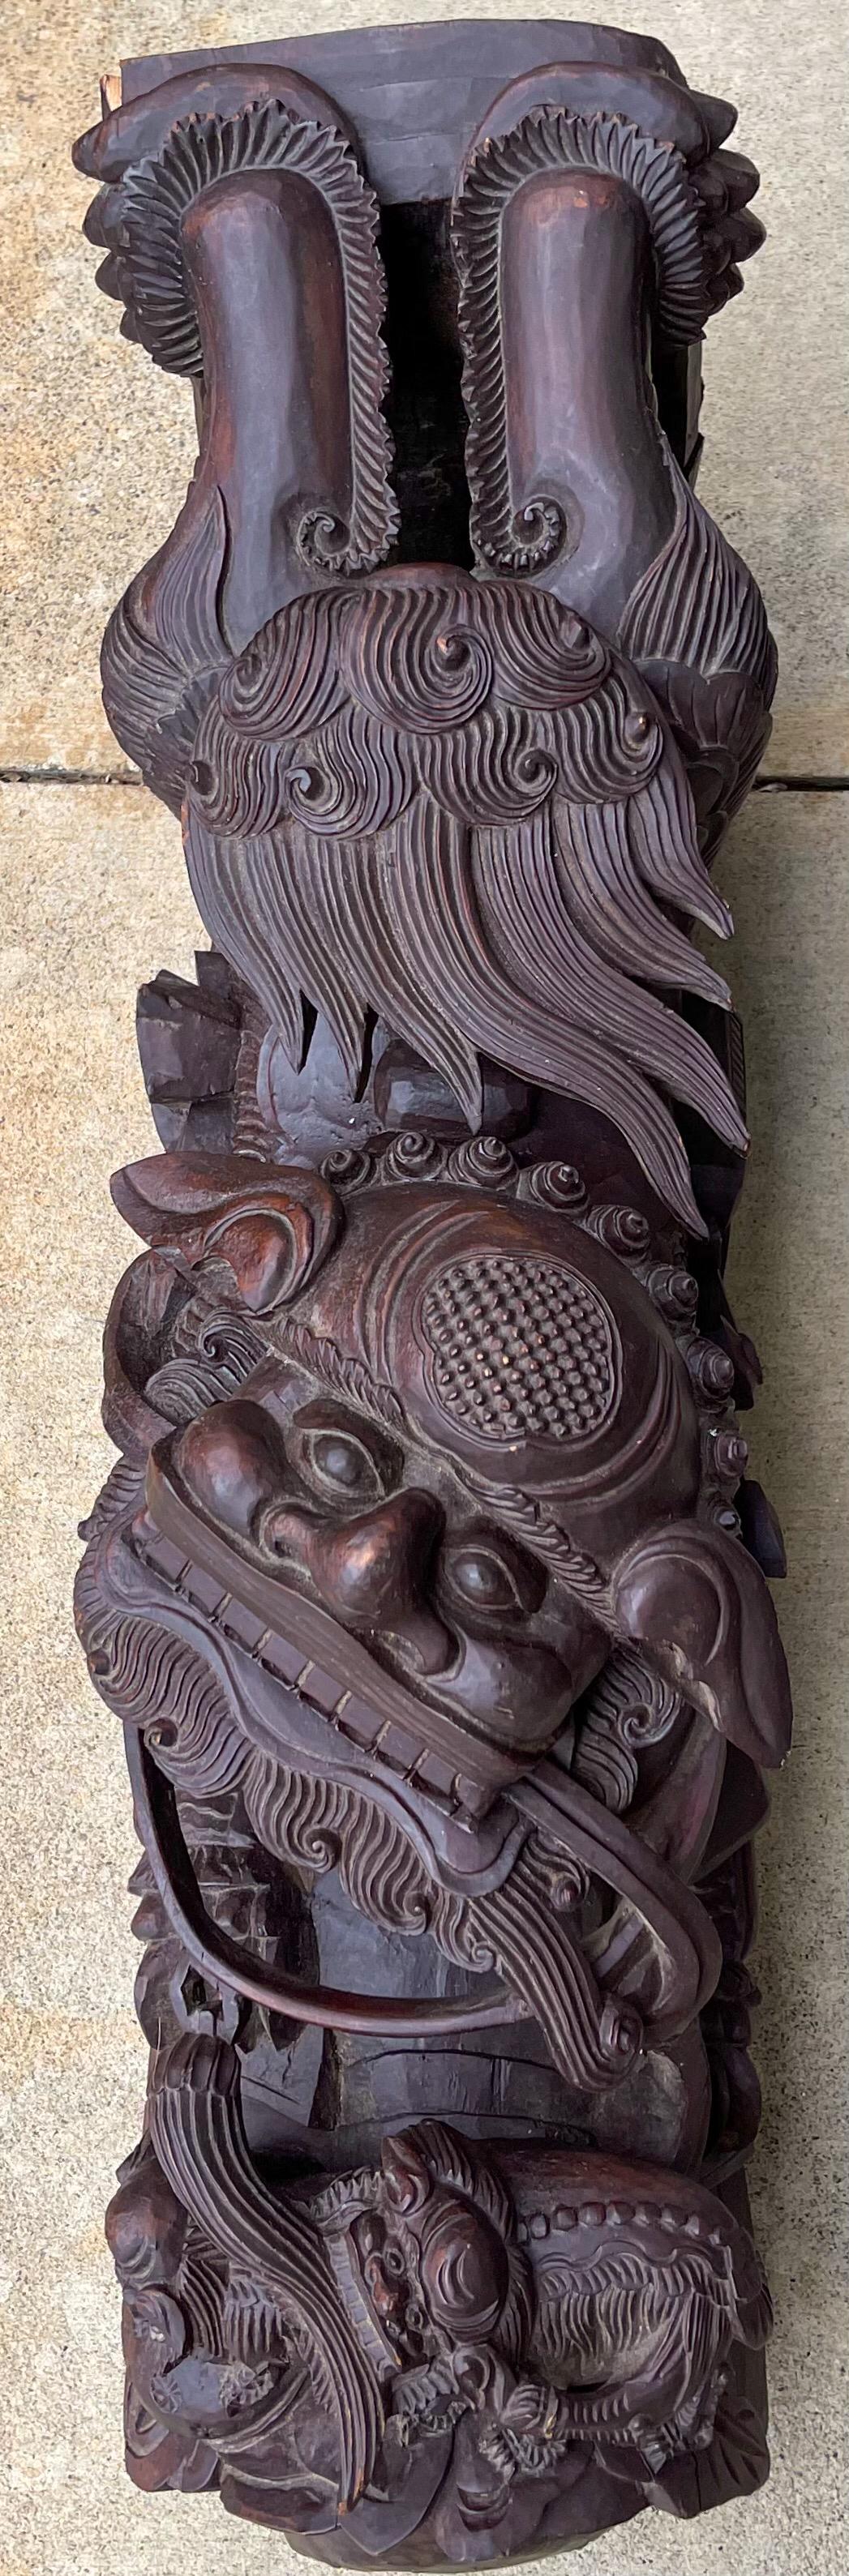 19th-C. Monumental Chinese Carved Food Dog Corbels / Architectural Fragments, 2 In Good Condition For Sale In Kennesaw, GA